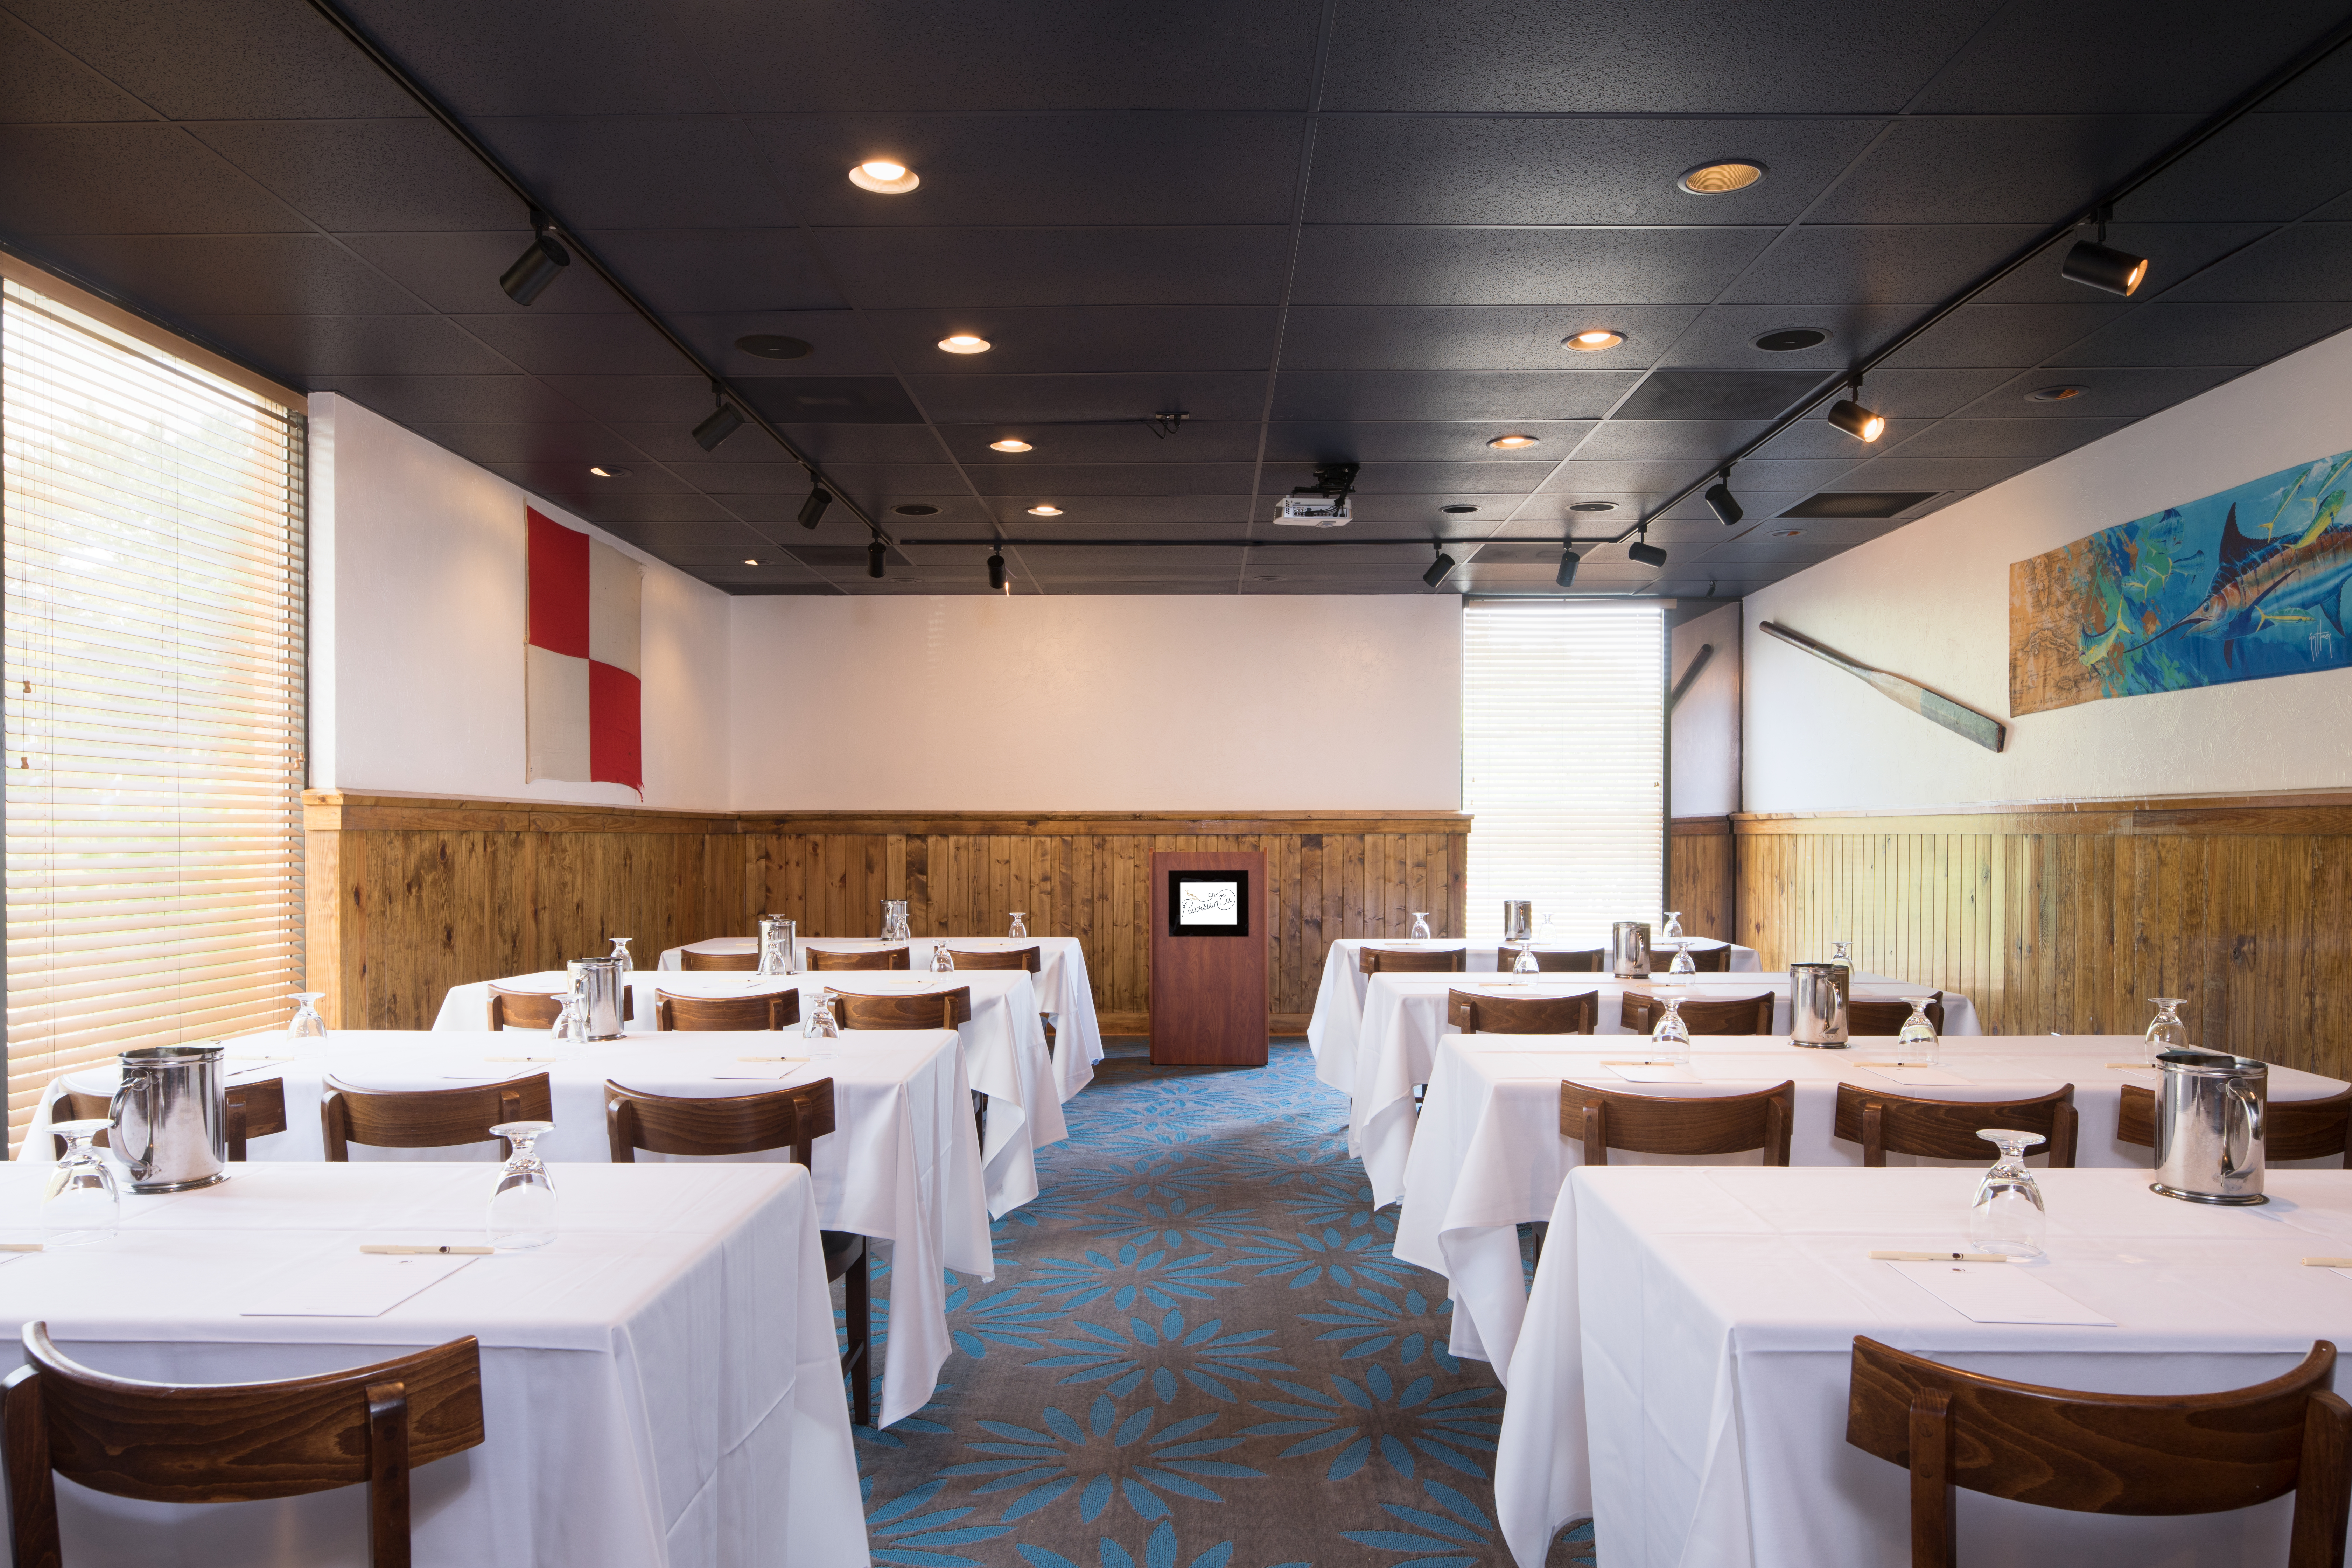 Classroom Setup in The Pier Meeting Room of EJ's Provision Company Restaurant With Tables and Chairs Facing Podium